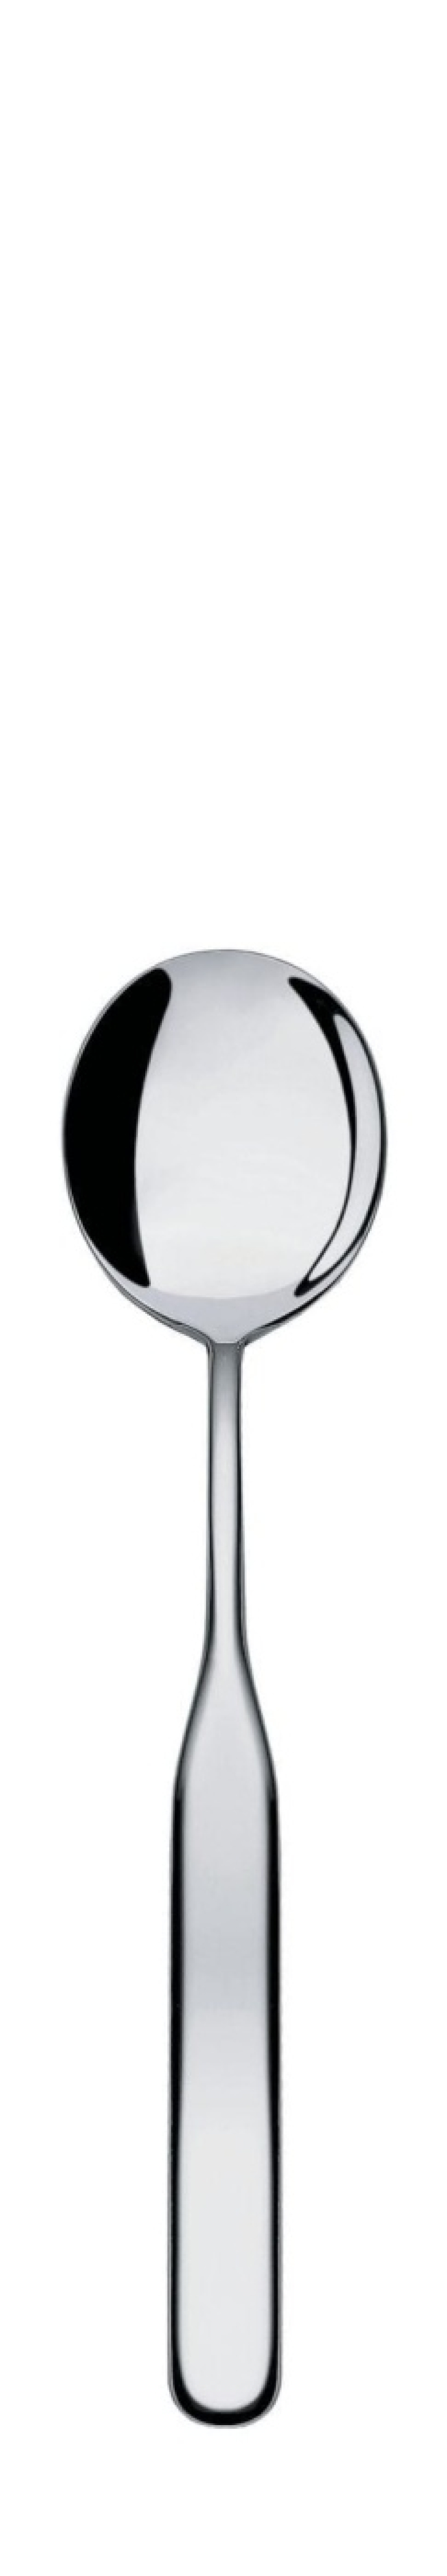 Table spoon, 20.5 cm, Collo-Alto - Alessi in the group Table setting / Cutlery / Spoons at KitchenLab (1466-16598)